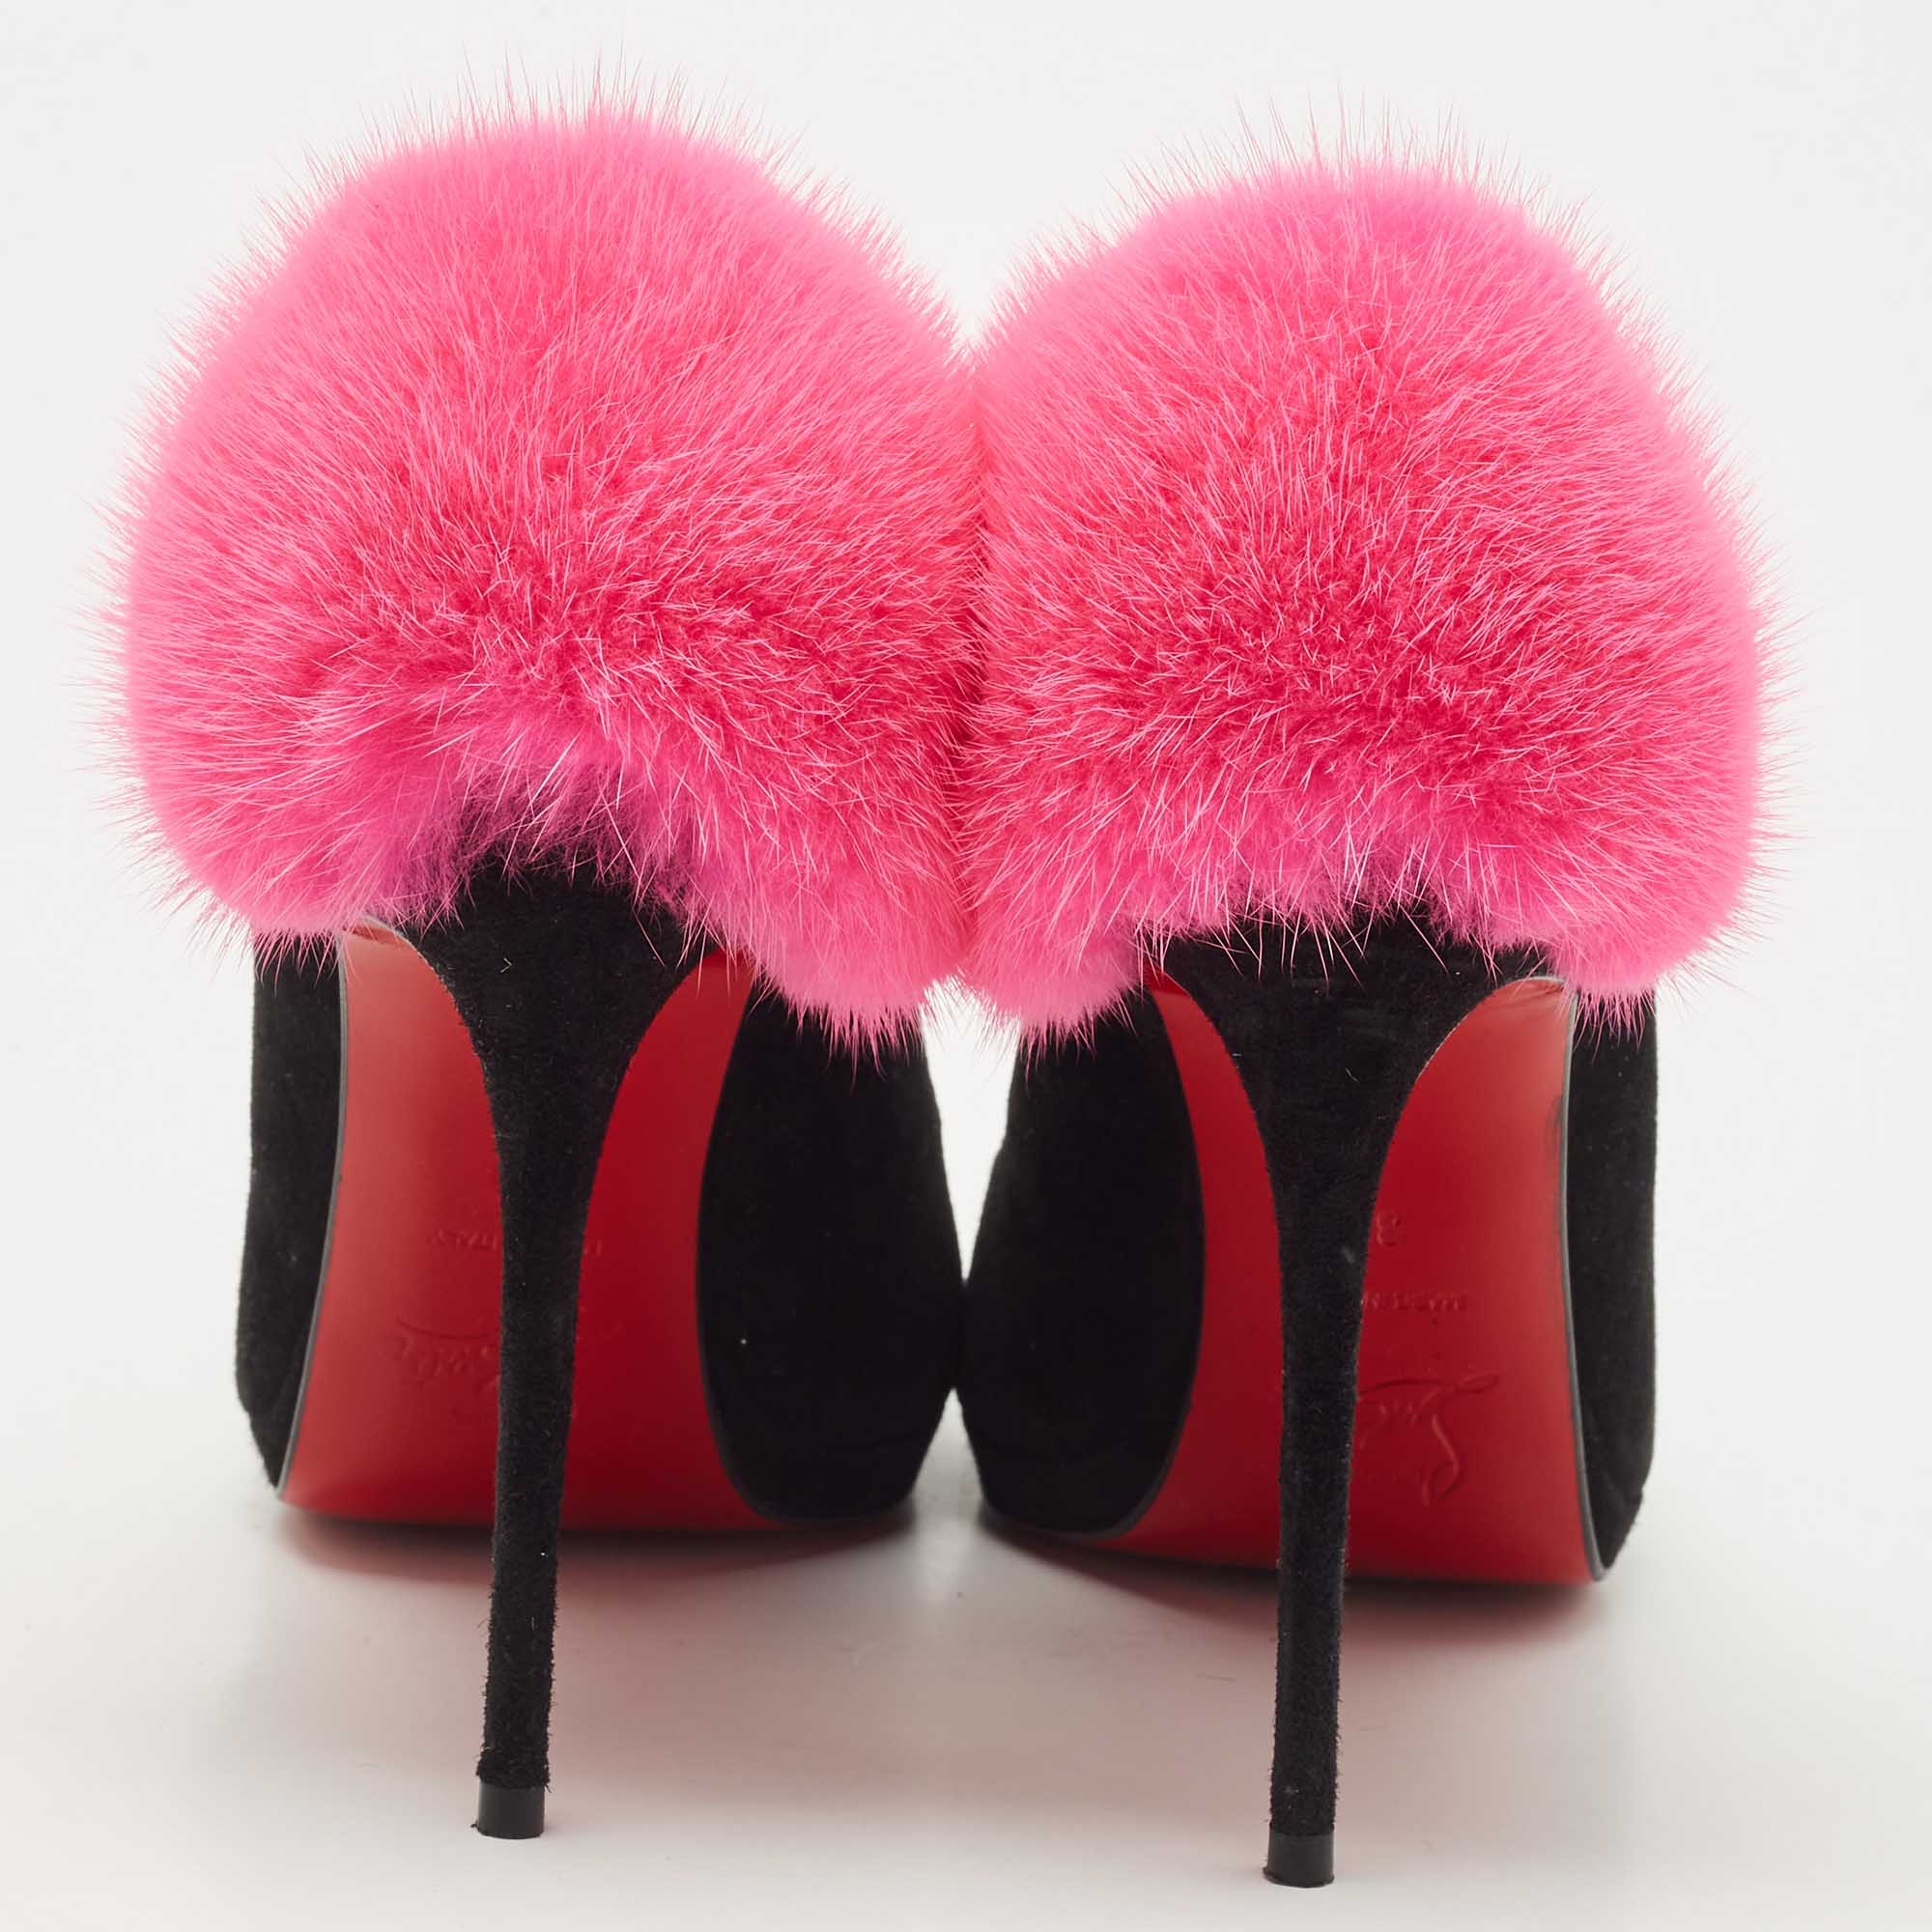 Christian Louboutin Black/Pink Suede And Fur Achilda Pumps Size 38